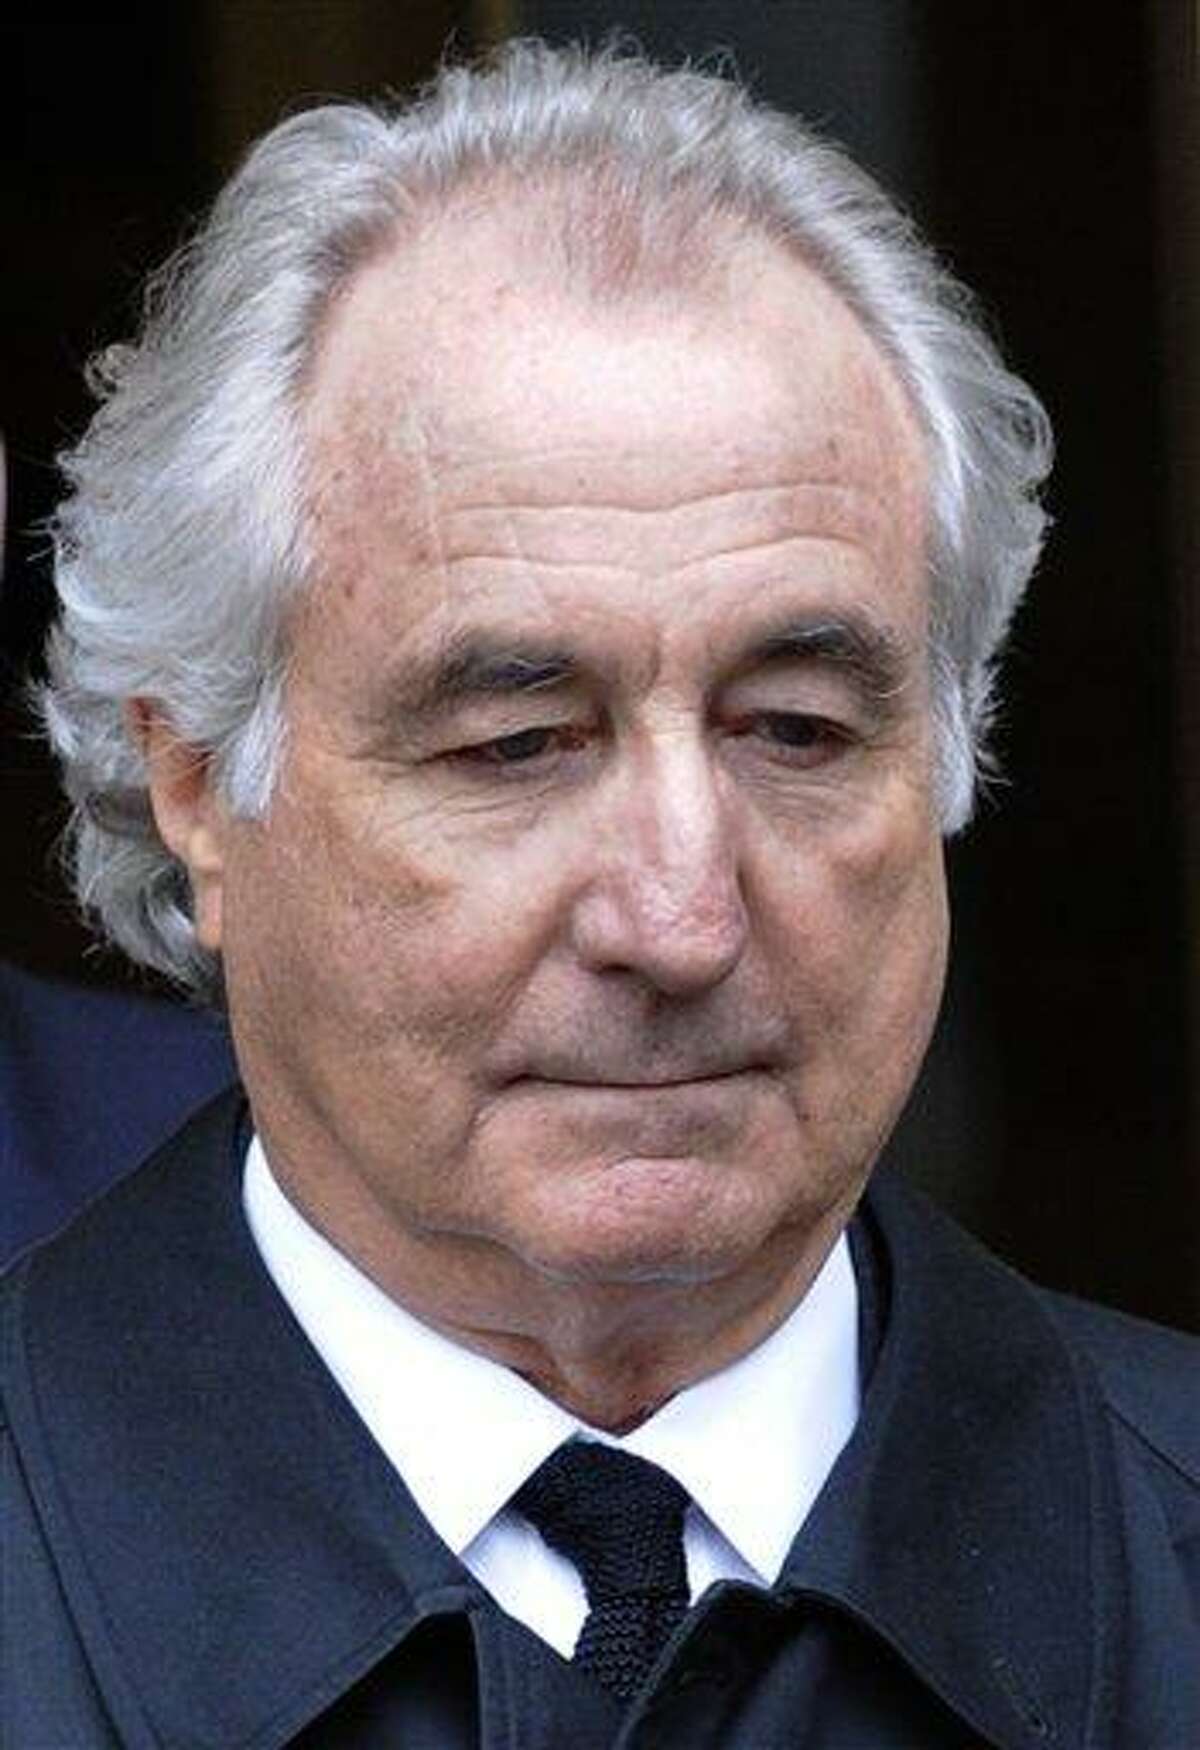 FILE - In this March 10, 2009 file photo, Bernard Madoff exits Manhattan federal court in New York. A law enforcement official tells The Associated Press that a son of Bernard Madoff has been found dead in New York City of an apparent suicide. The official says Mark Madoff was found hanged in his Manhattan apartment, Saturday, Dec. 11, 2010. (AP Photo/Louis Lanzano, file)